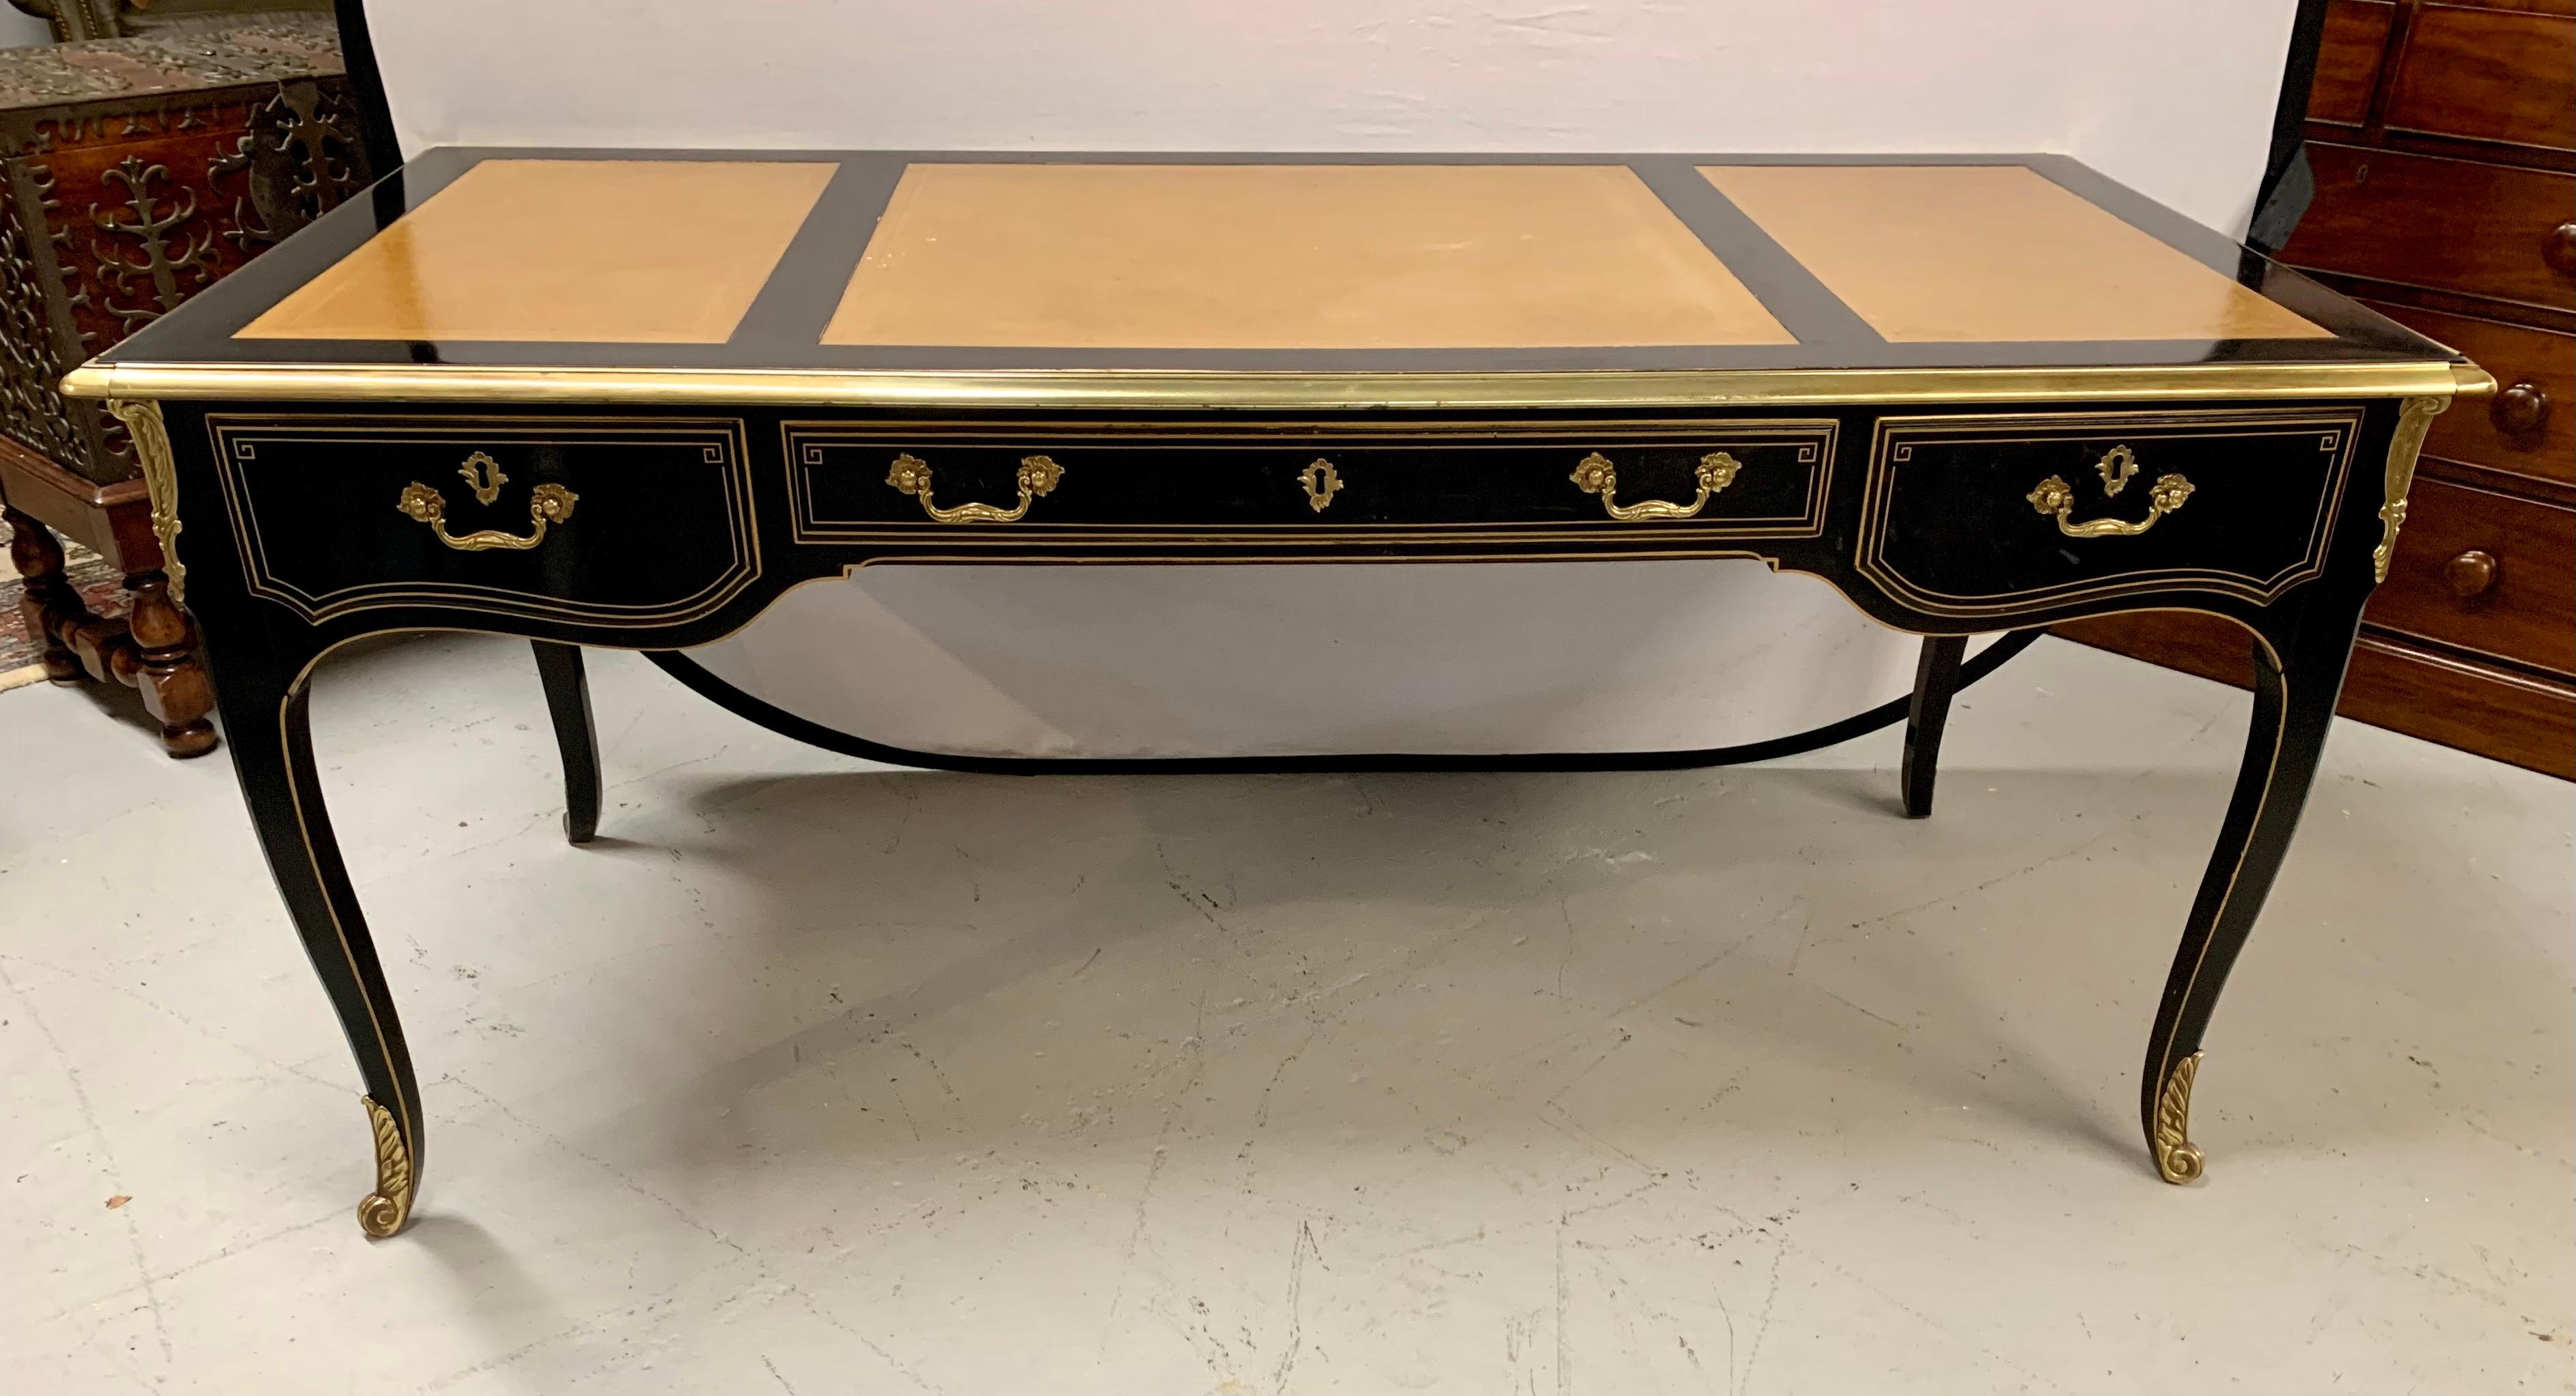 A beautiful French Louis XV style ebonized wood desk bearing ormolu mountings throughout the three drawer desk, with an inset leather writing surface.